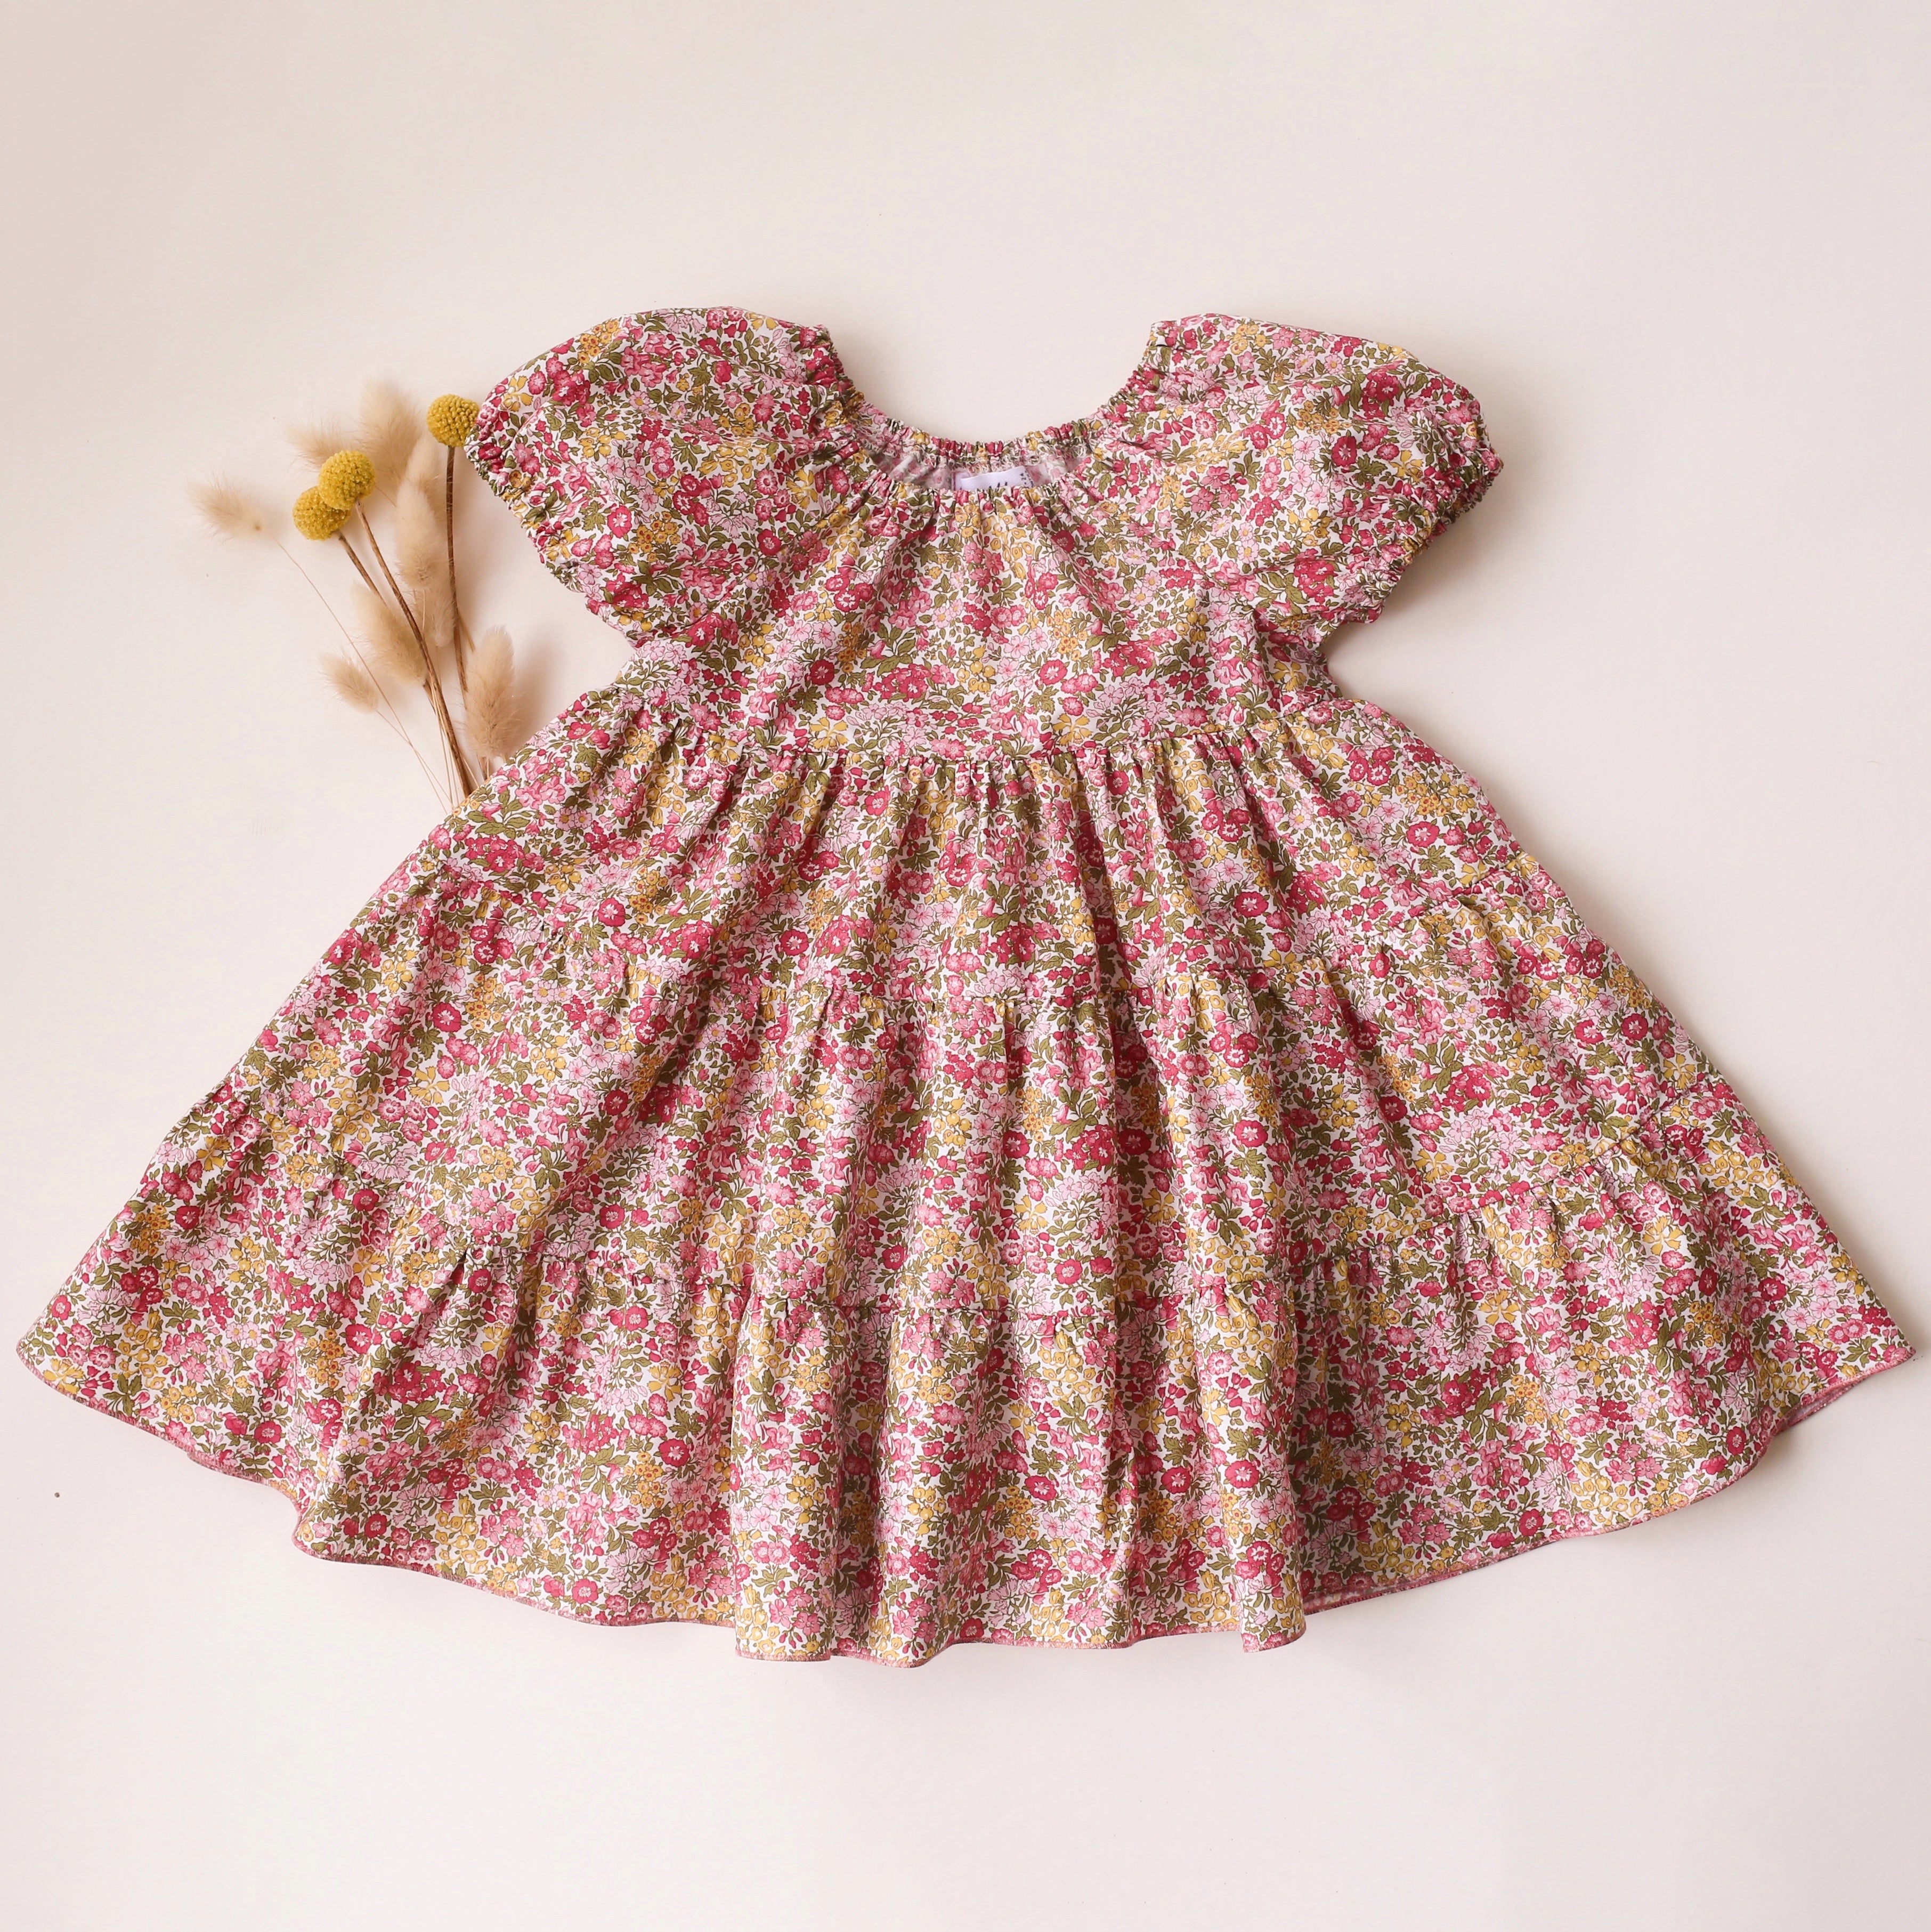 Penstemon Road Tiered Dress with Puff Sleeve